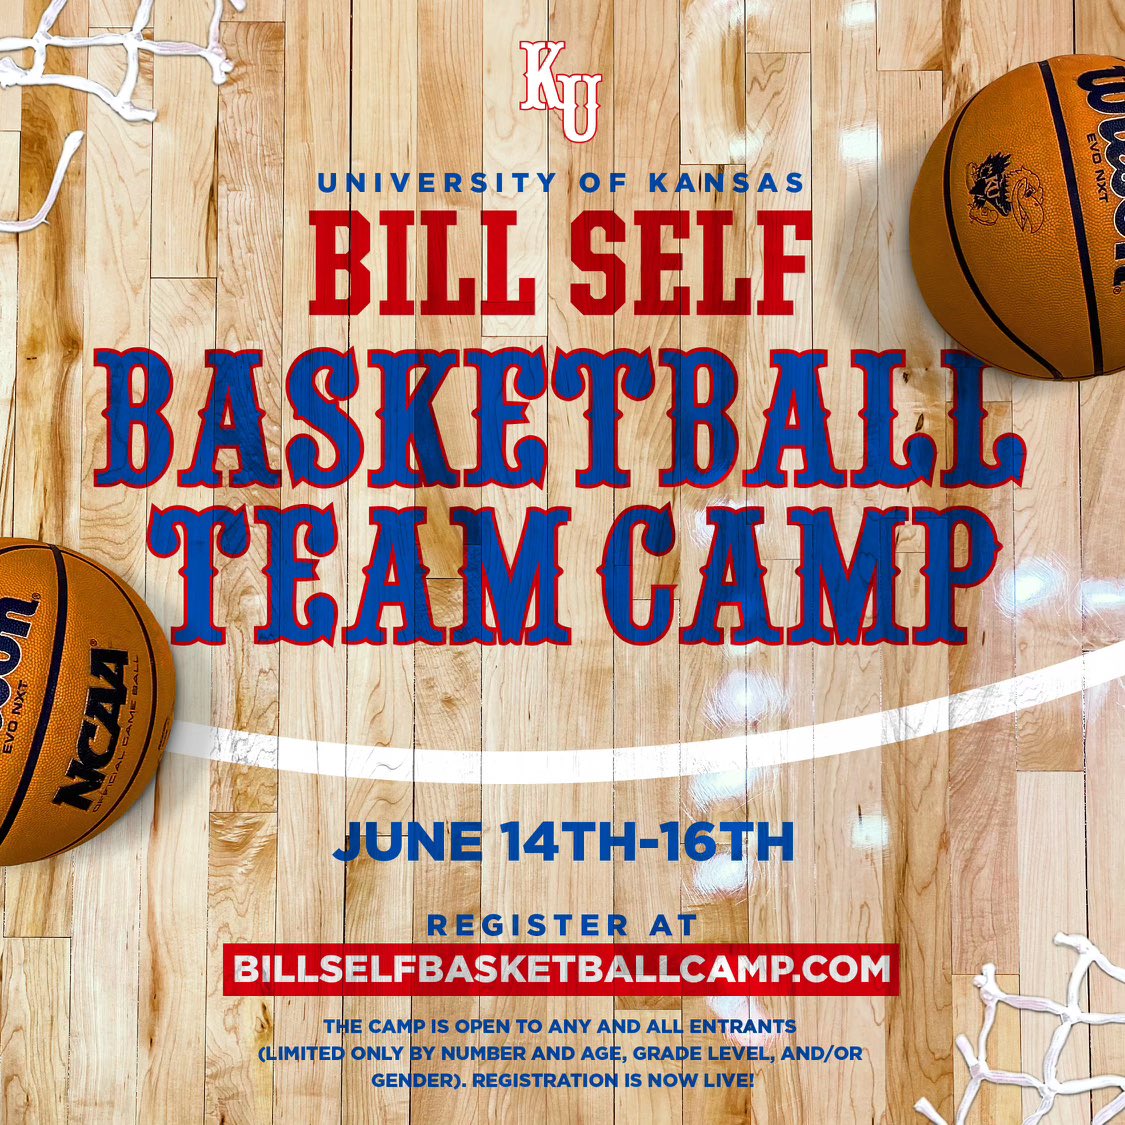 .@CoachBillSelf Basketball Team Camp is back this summer 🗣️ Don’t miss your chance to be crowned Team Camp Champs 🏆 Register today at BillSelfBasketballCamp.com